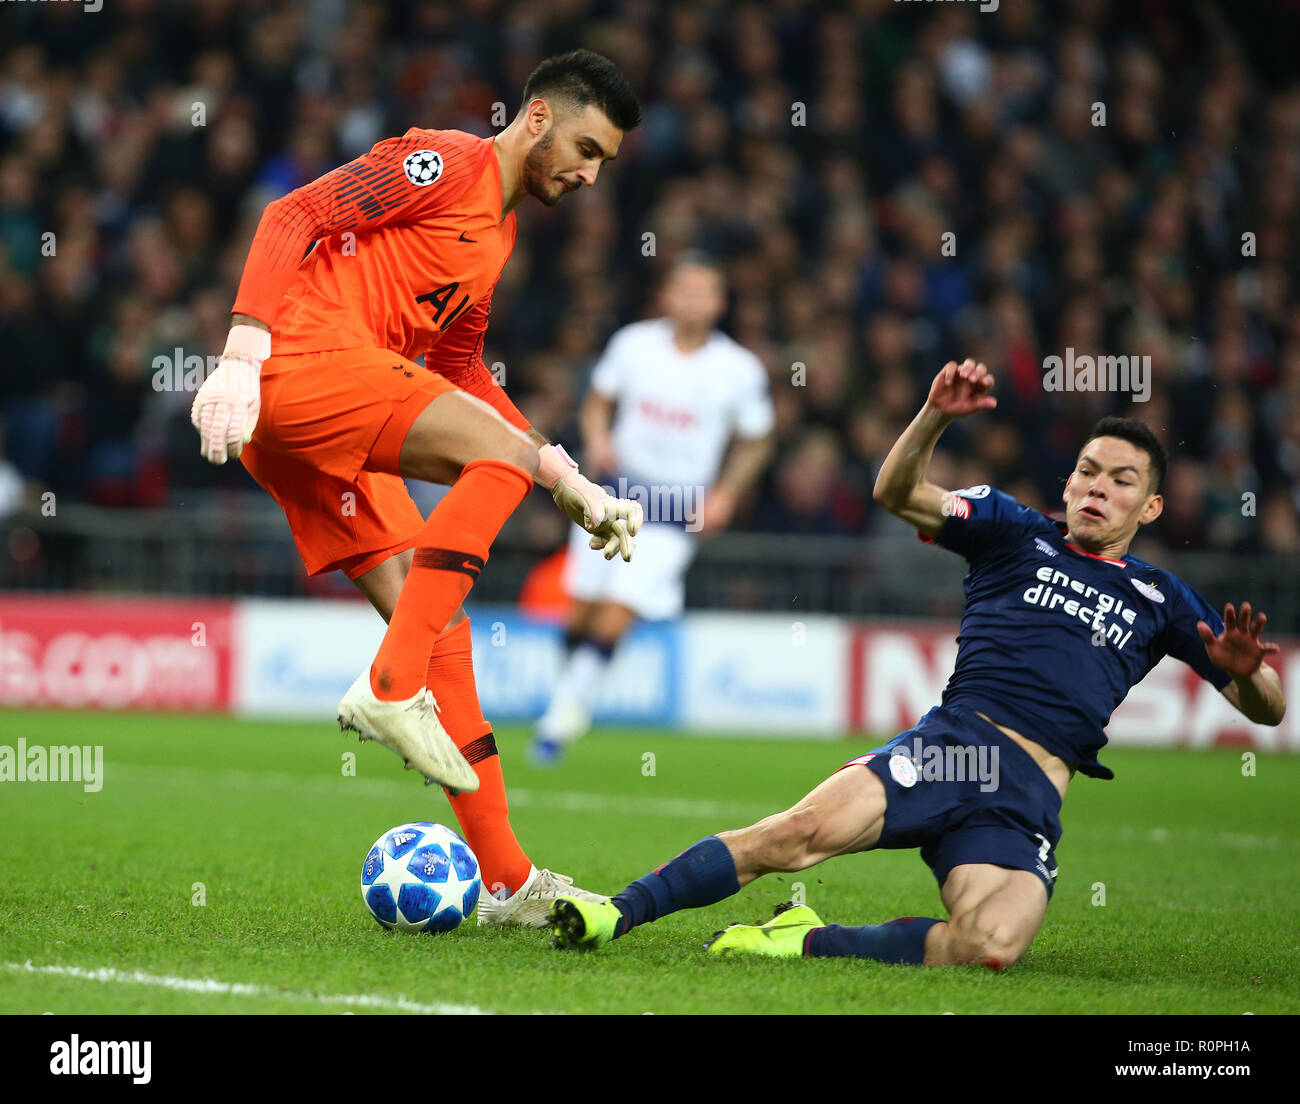 London, England, 06th November 2018.  L-R Tottenham Hotspur's Paulo Gazzaniga and Hirving Lozano of PSV Eindhoven during Champion League Group B between Tottenham Hotspur and PSV Eindhoven at Wembley stadium , London, England on 06 Nov 2018. Credit Action Foto Sport  FA Premier League and Football League images are subject to DataCo Licence. Editorial use ONLY. No print sales. No personal use sales. NO UNPAID USE Credit: Action Foto Sport/Alamy Live News Stock Photo